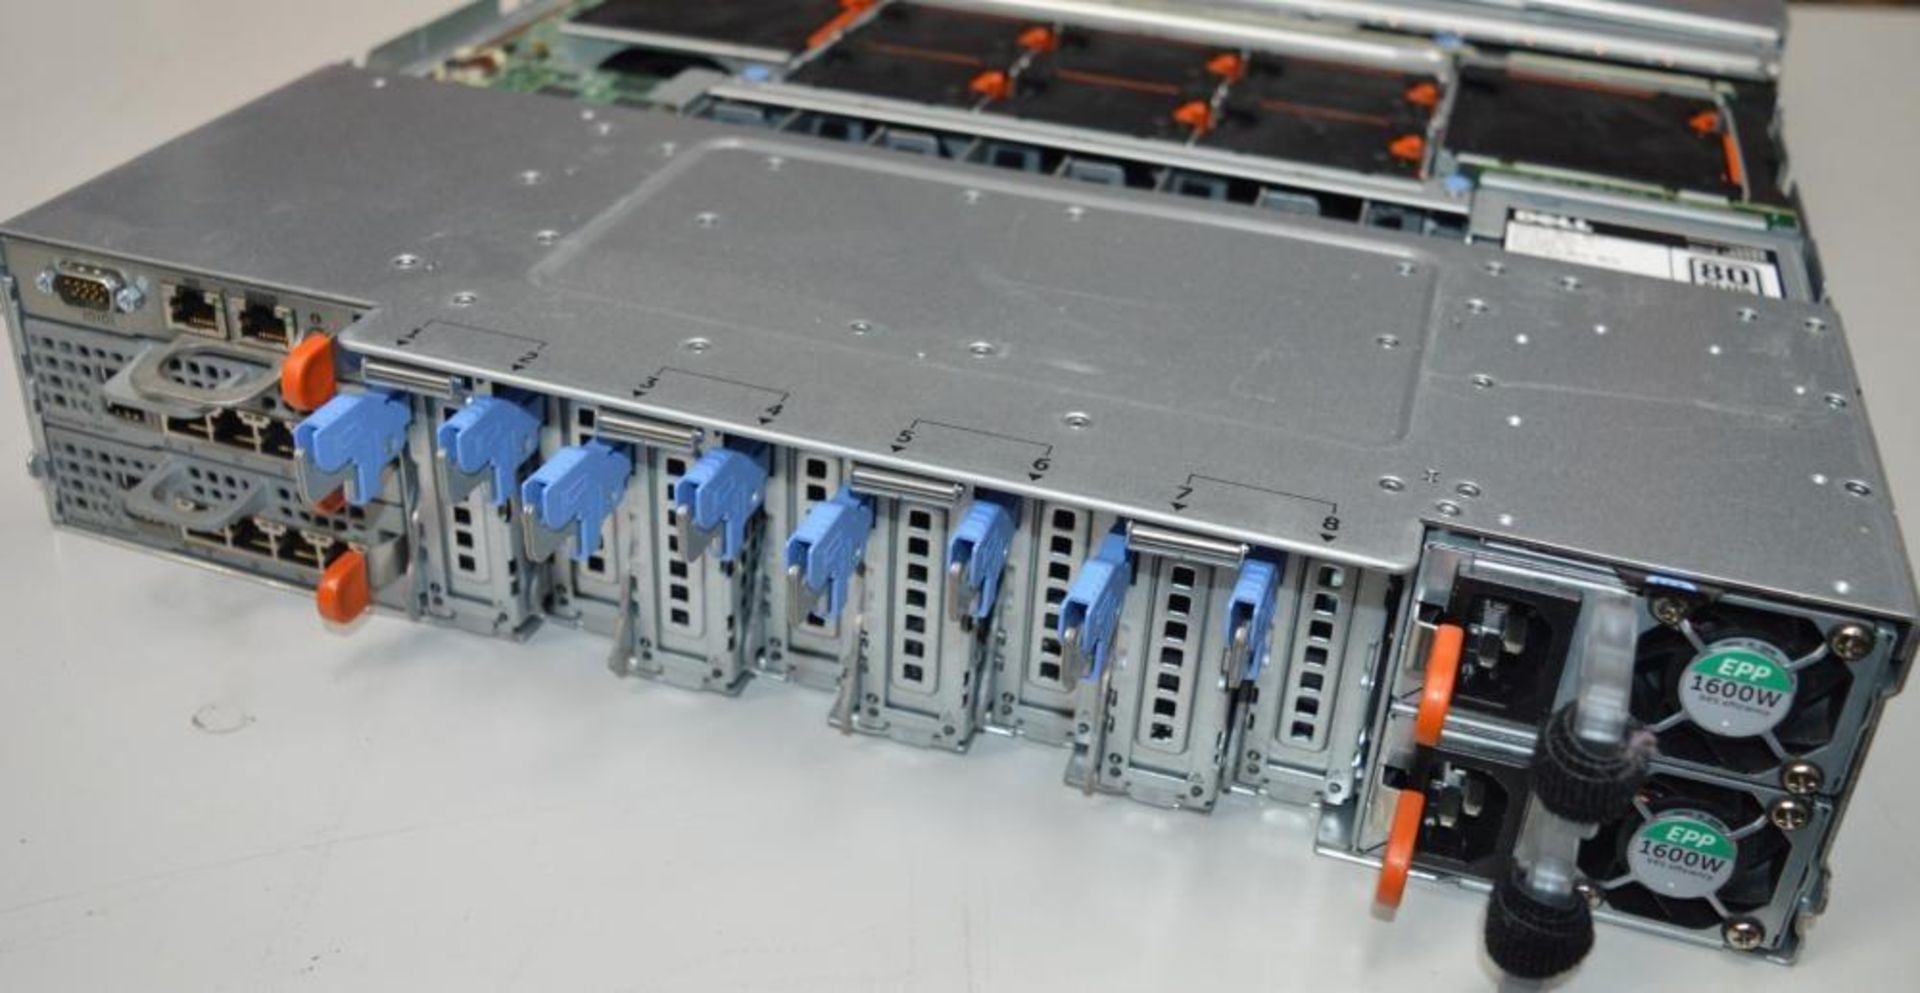 1 x Dell Power Edge FX2S Enclosure With Two Poweredge FC630 Blade Servers, 2 x Xeon E5-2695V3 14 Cor - Image 10 of 16